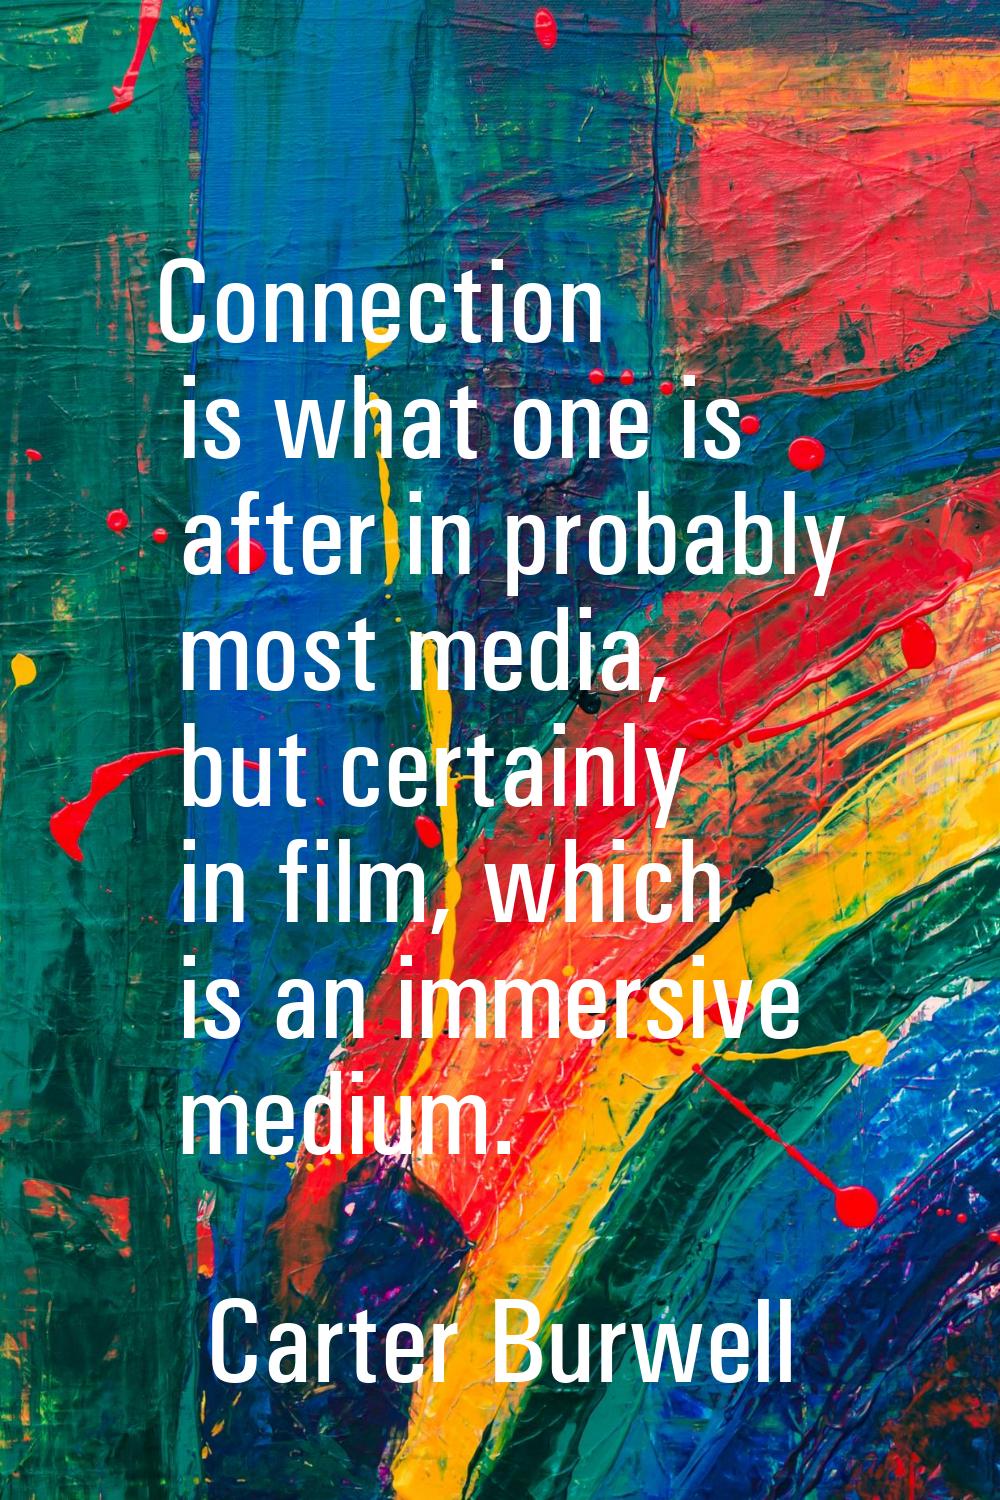 Connection is what one is after in probably most media, but certainly in film, which is an immersiv